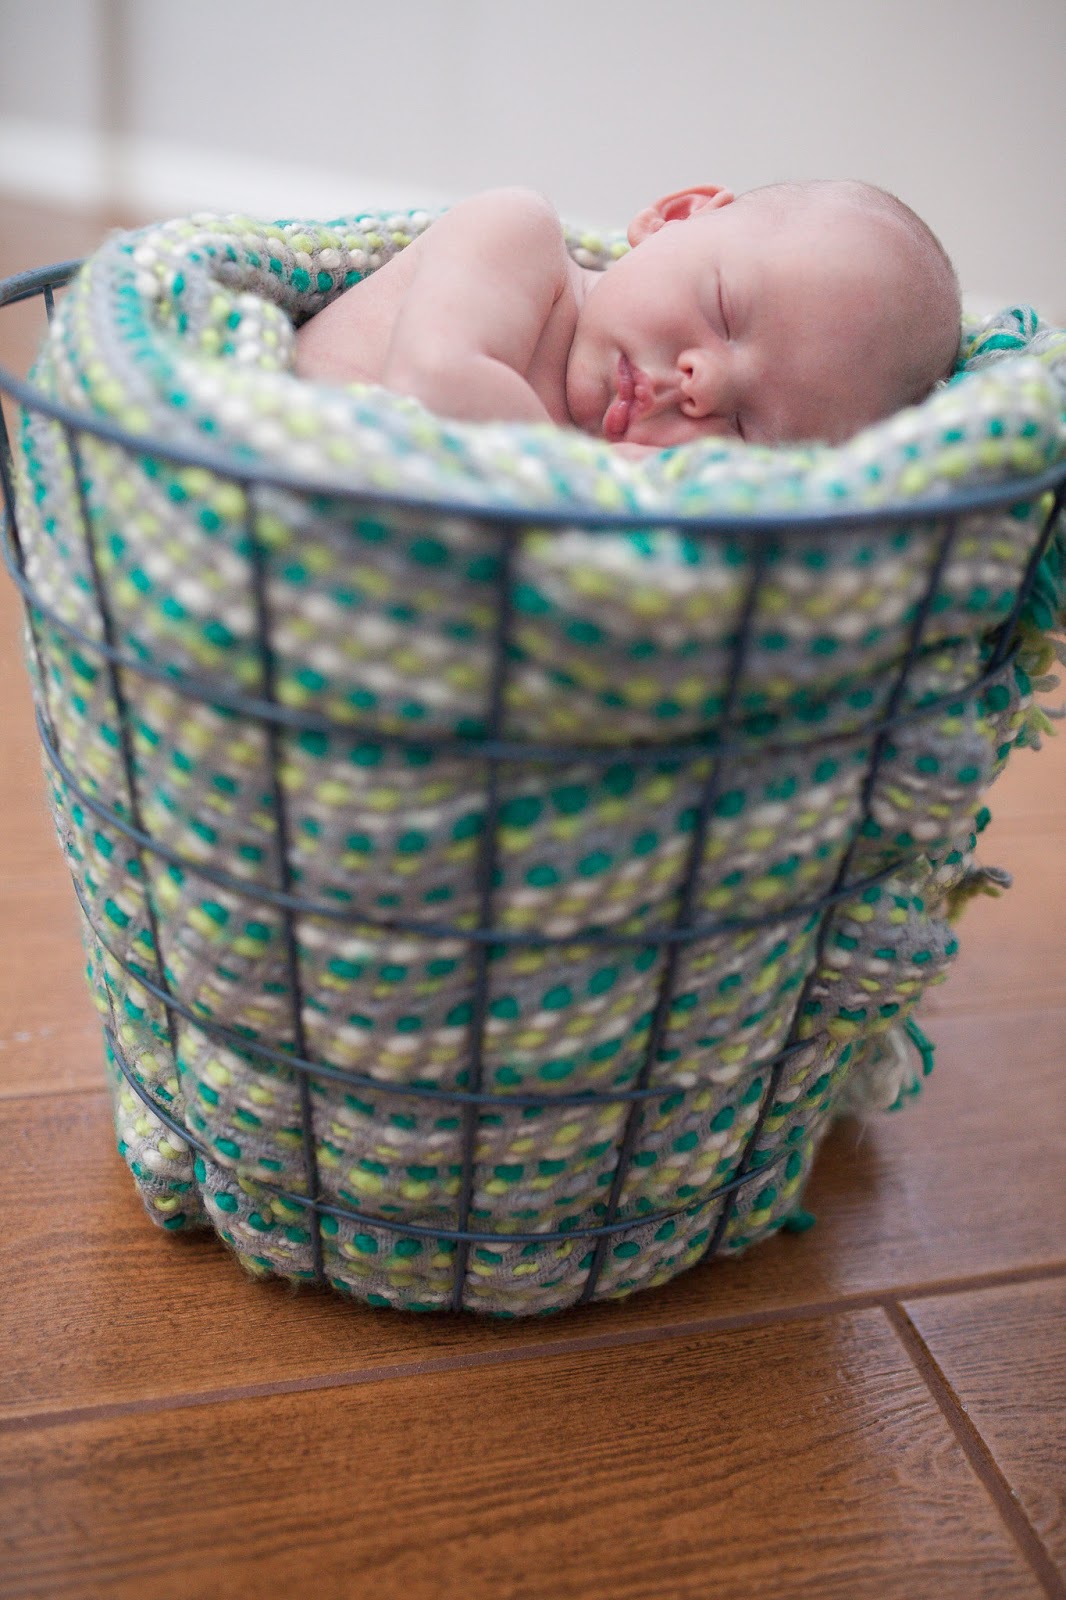 Sleeping baby during newborn pictures. 